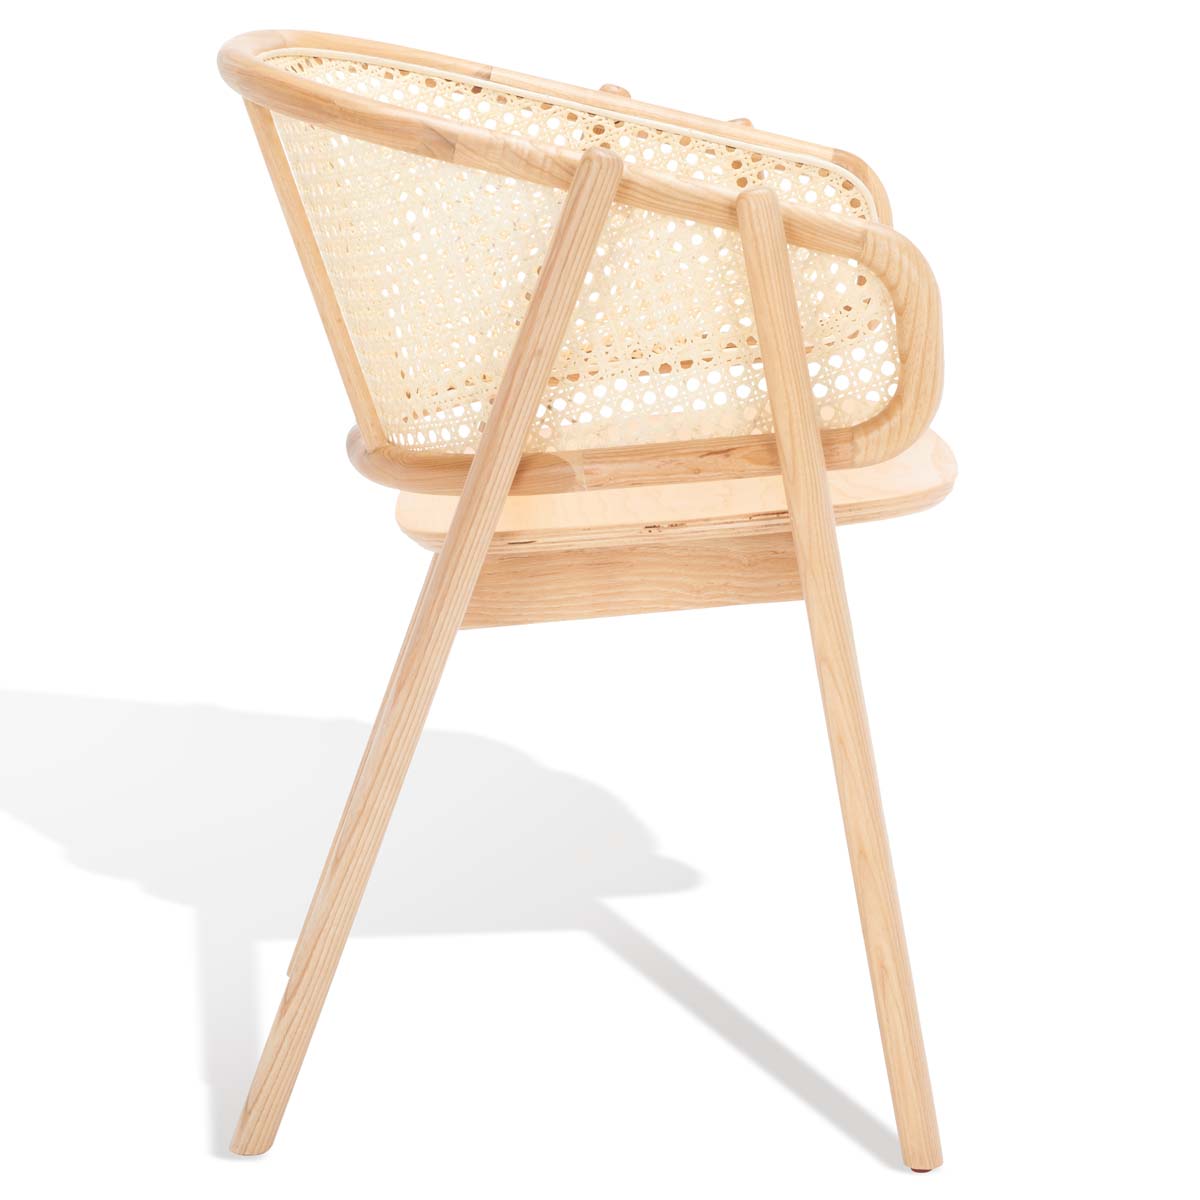 Safavieh Couture Emmy Rattan Back Dining Chair , SFV4128 - Natural